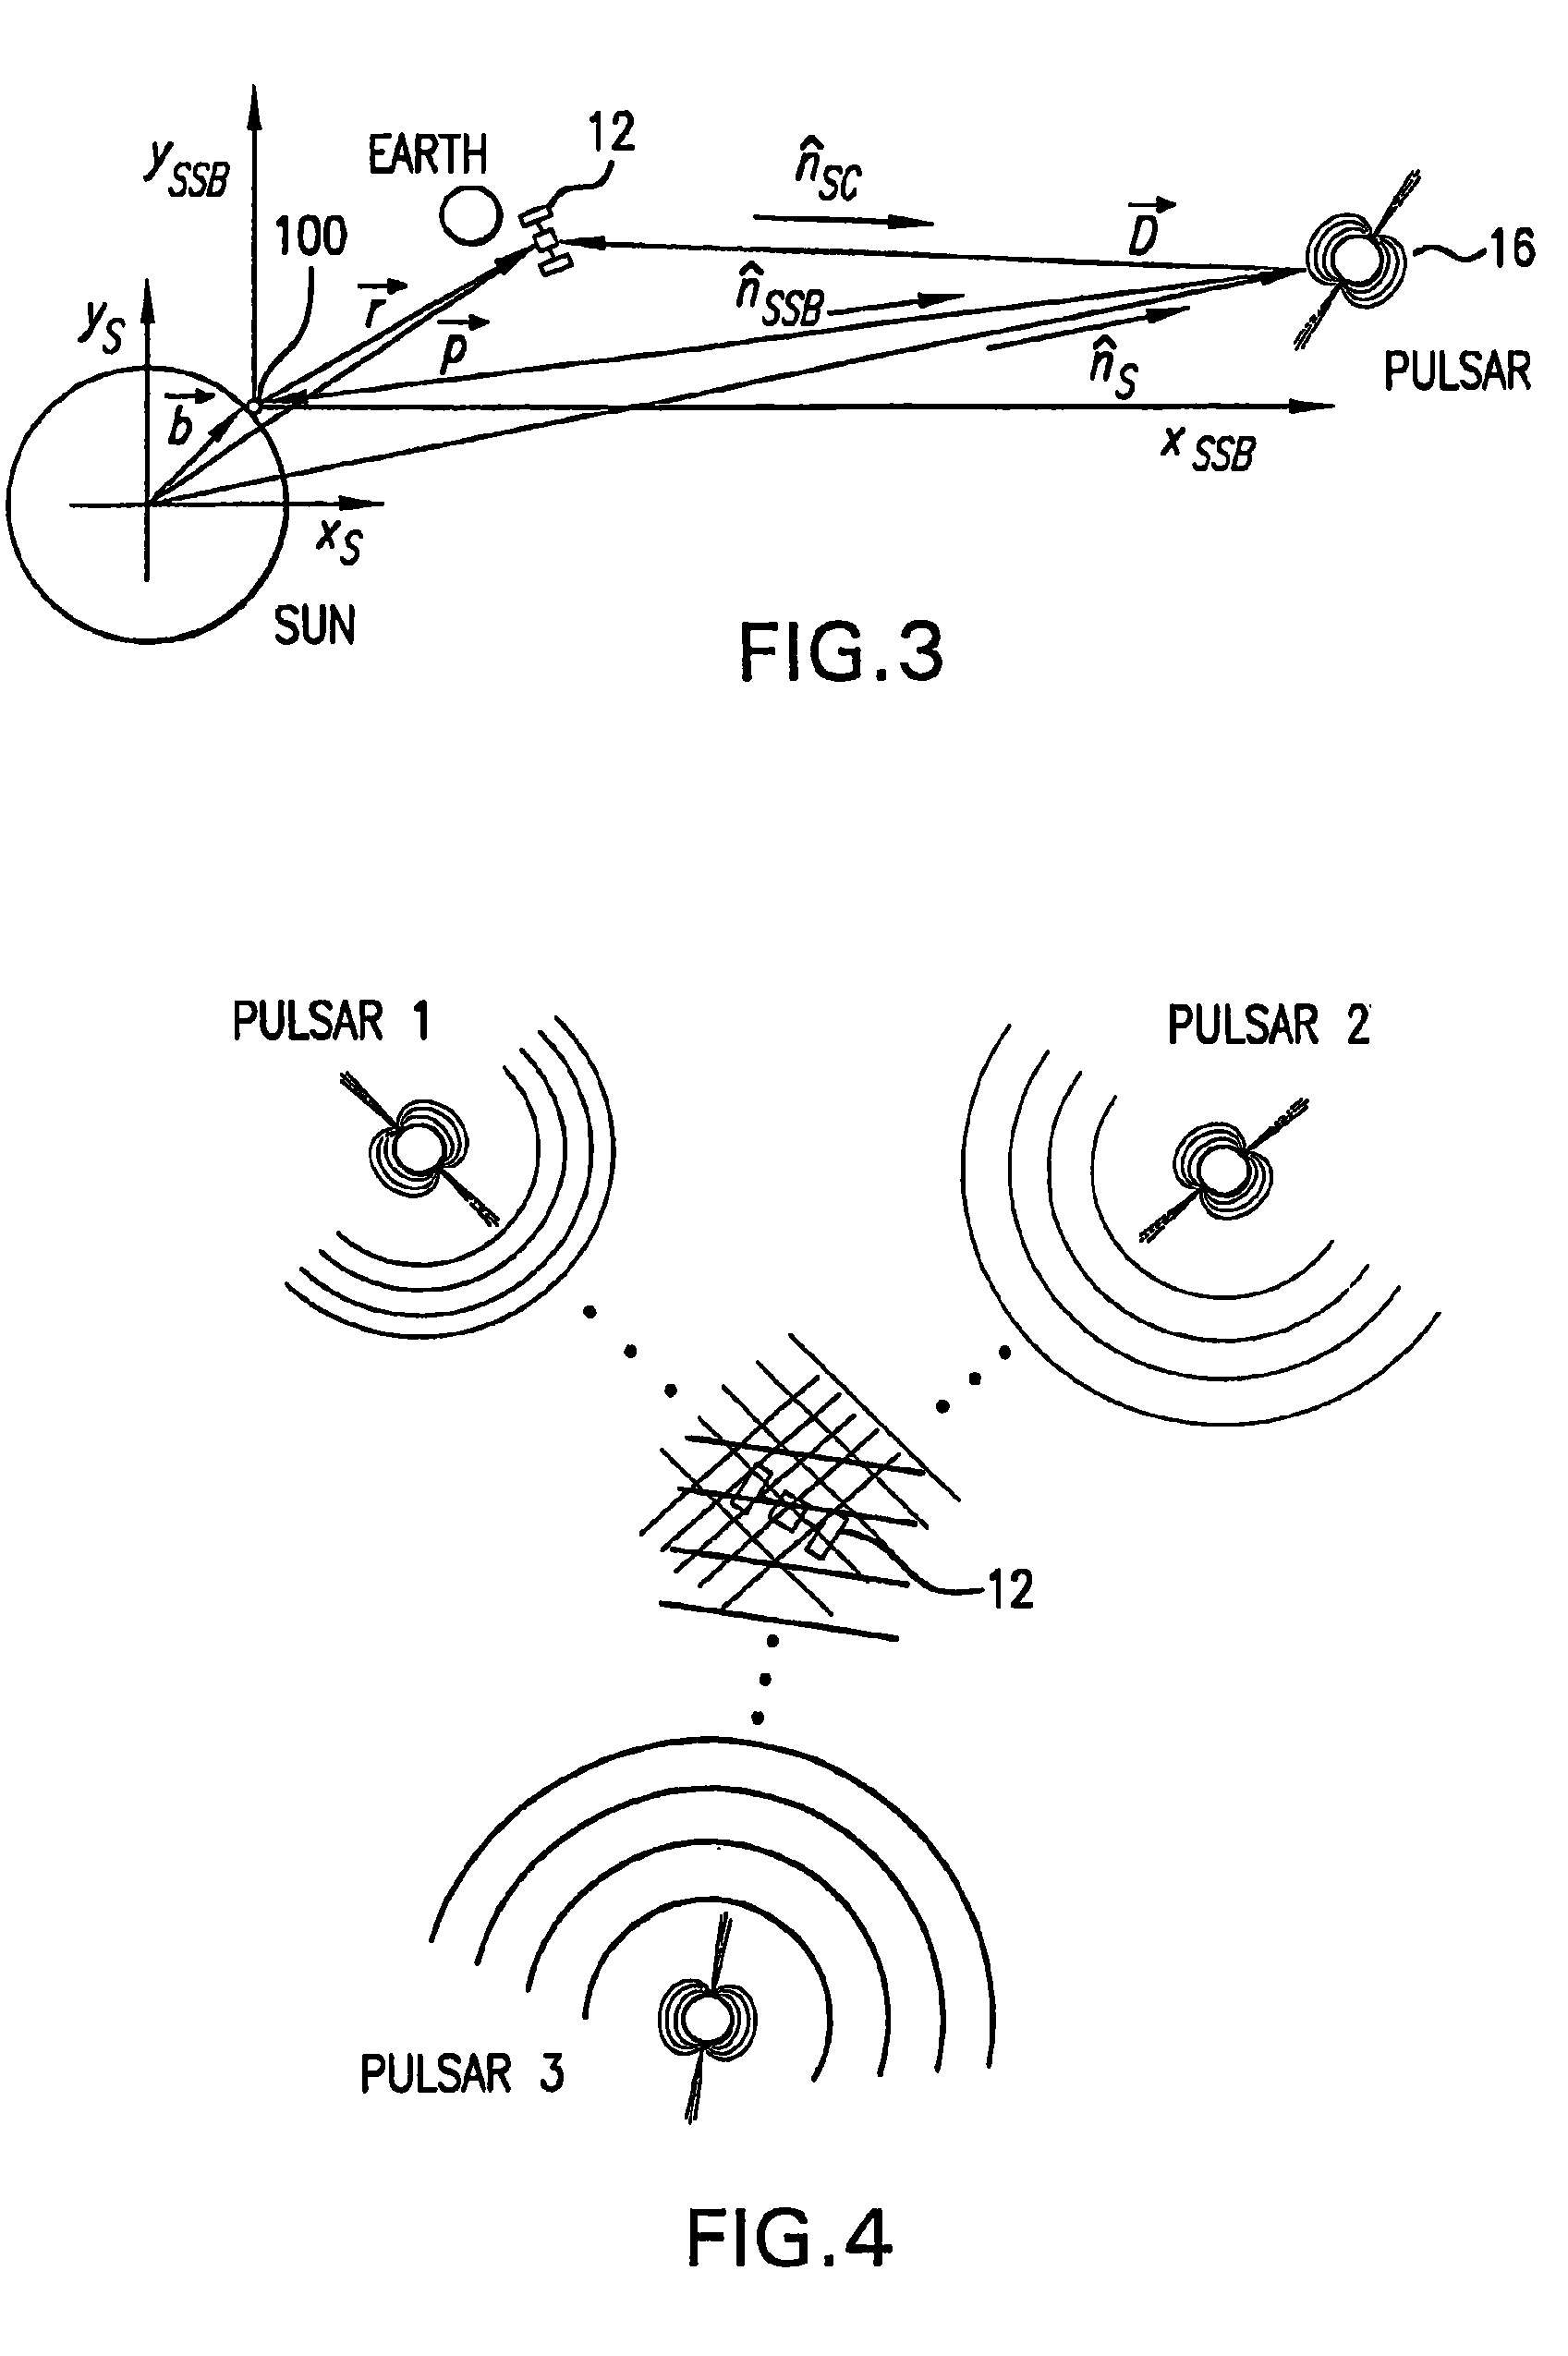 Navigation system and method using modulated celestial radiation sources